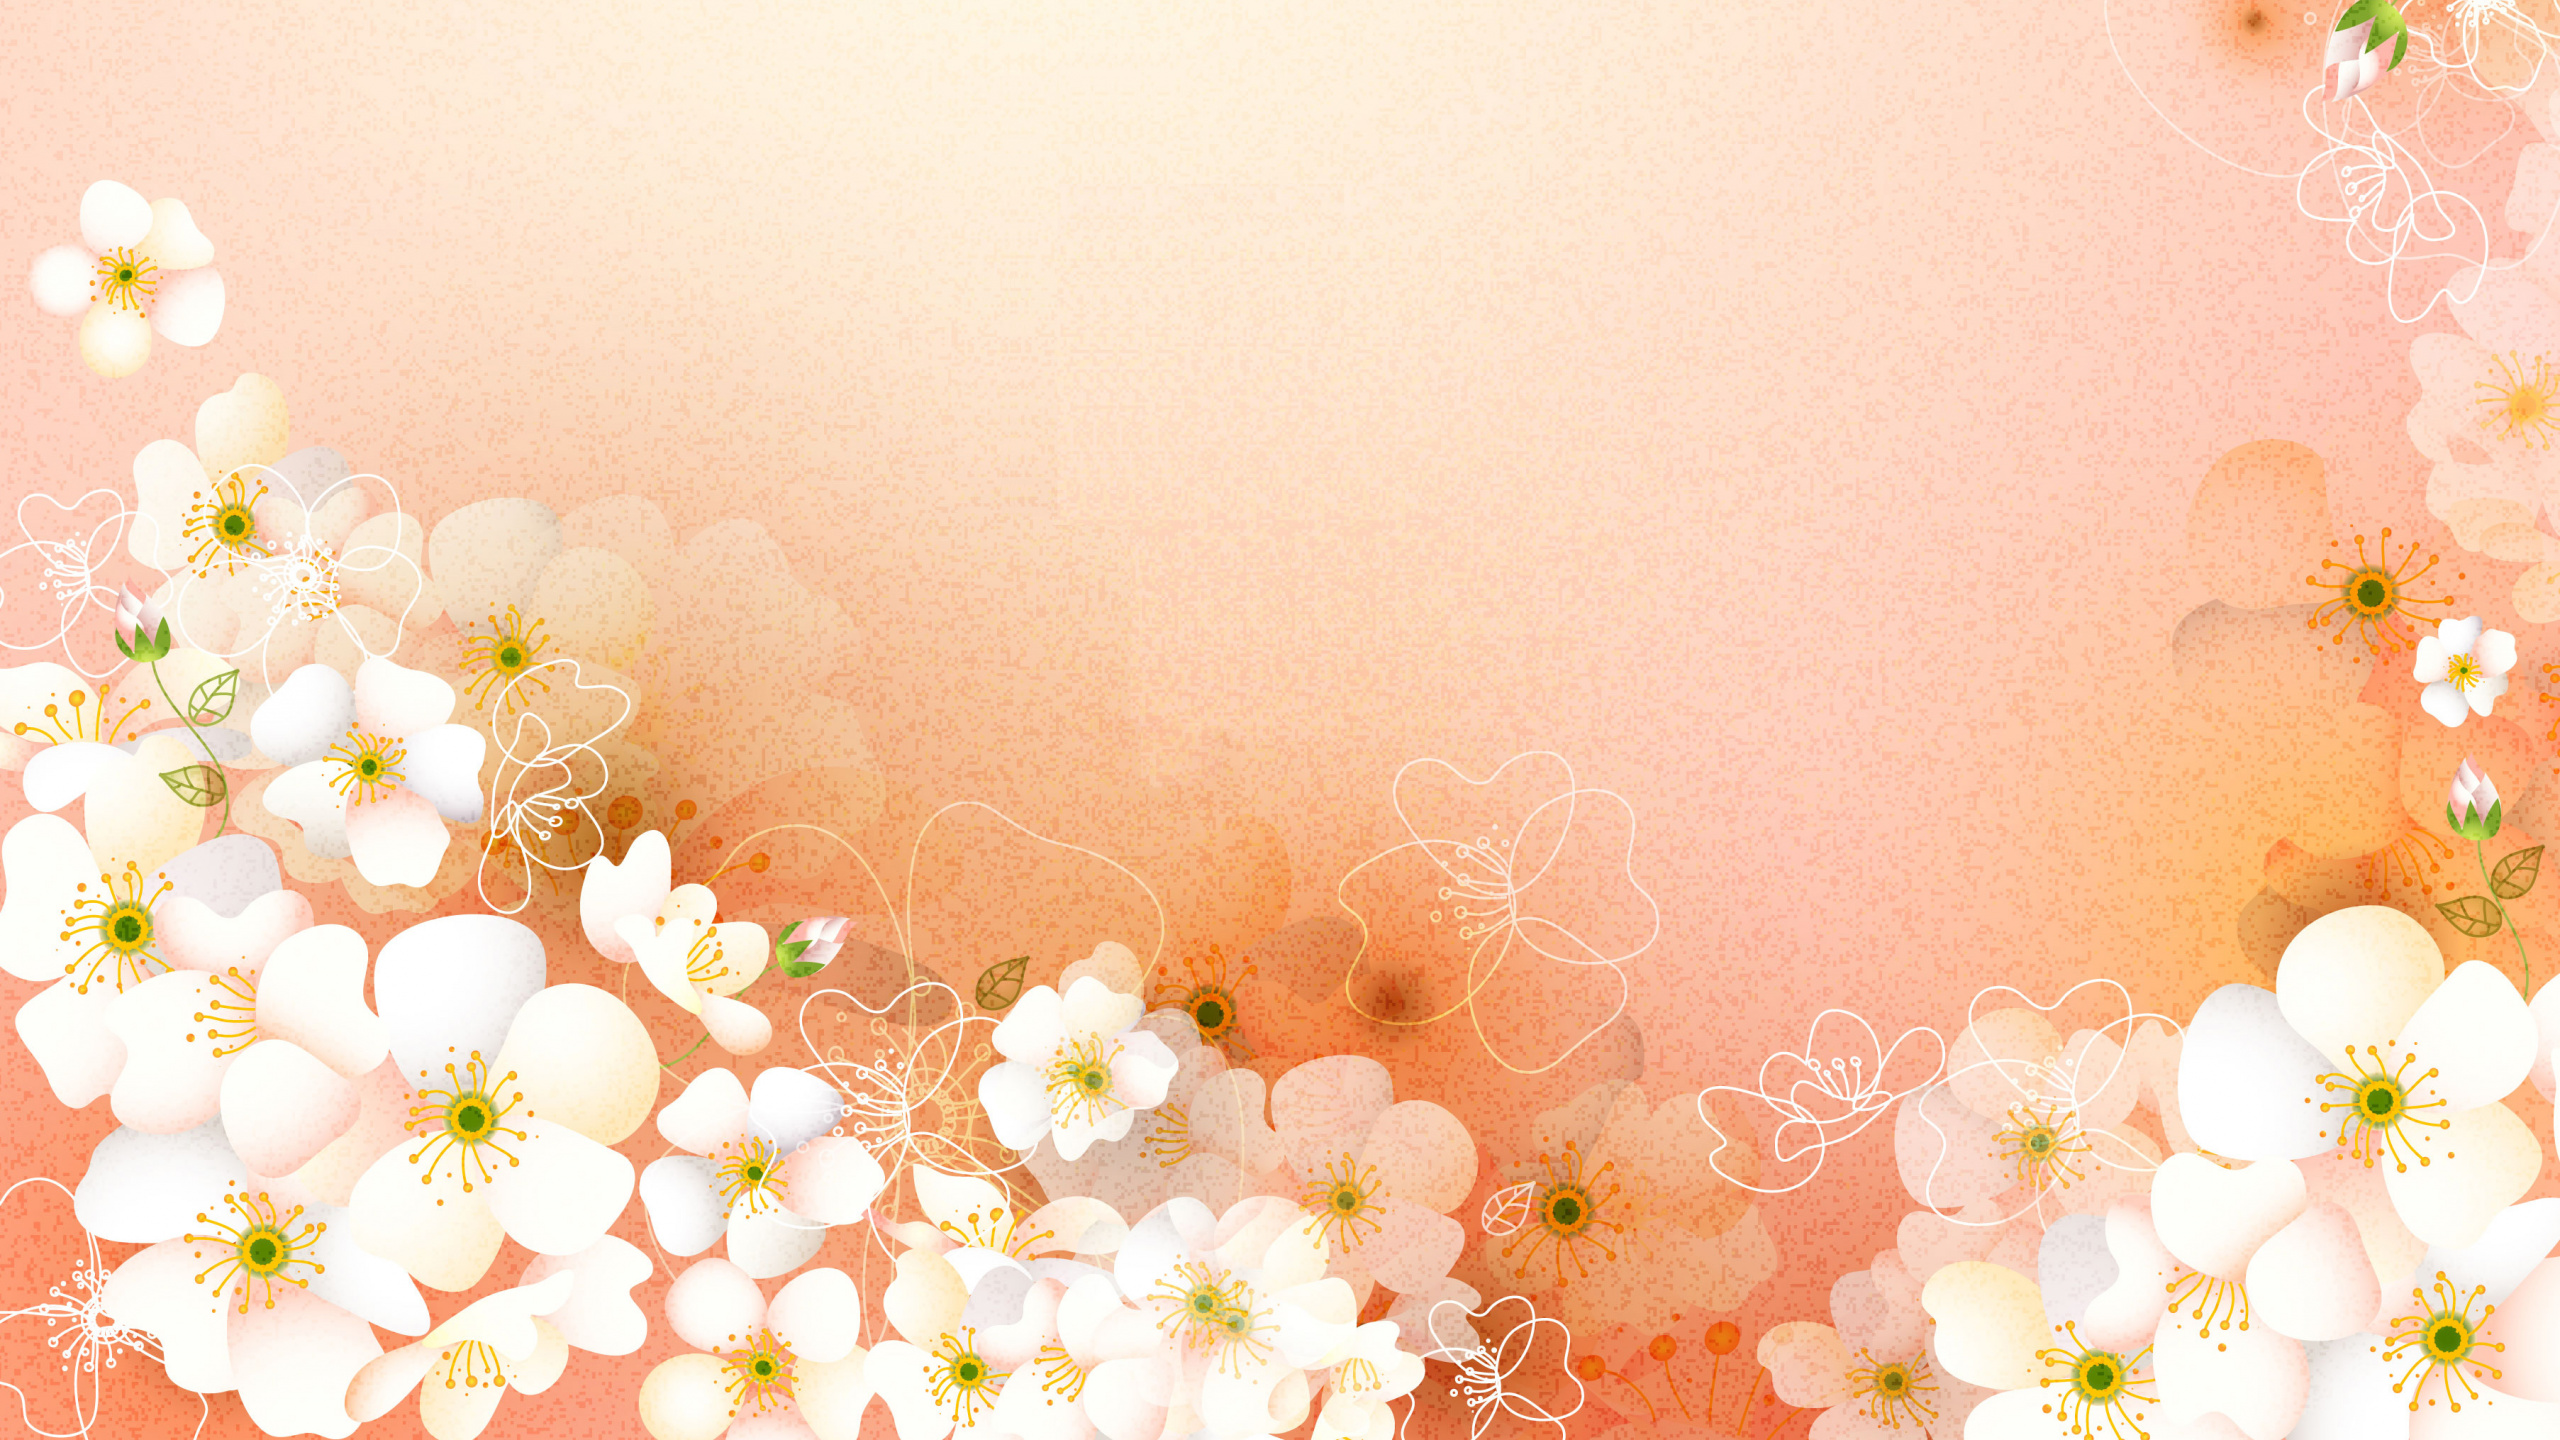 White and Yellow Flowers With Pink Background. Wallpaper in 2560x1440 Resolution